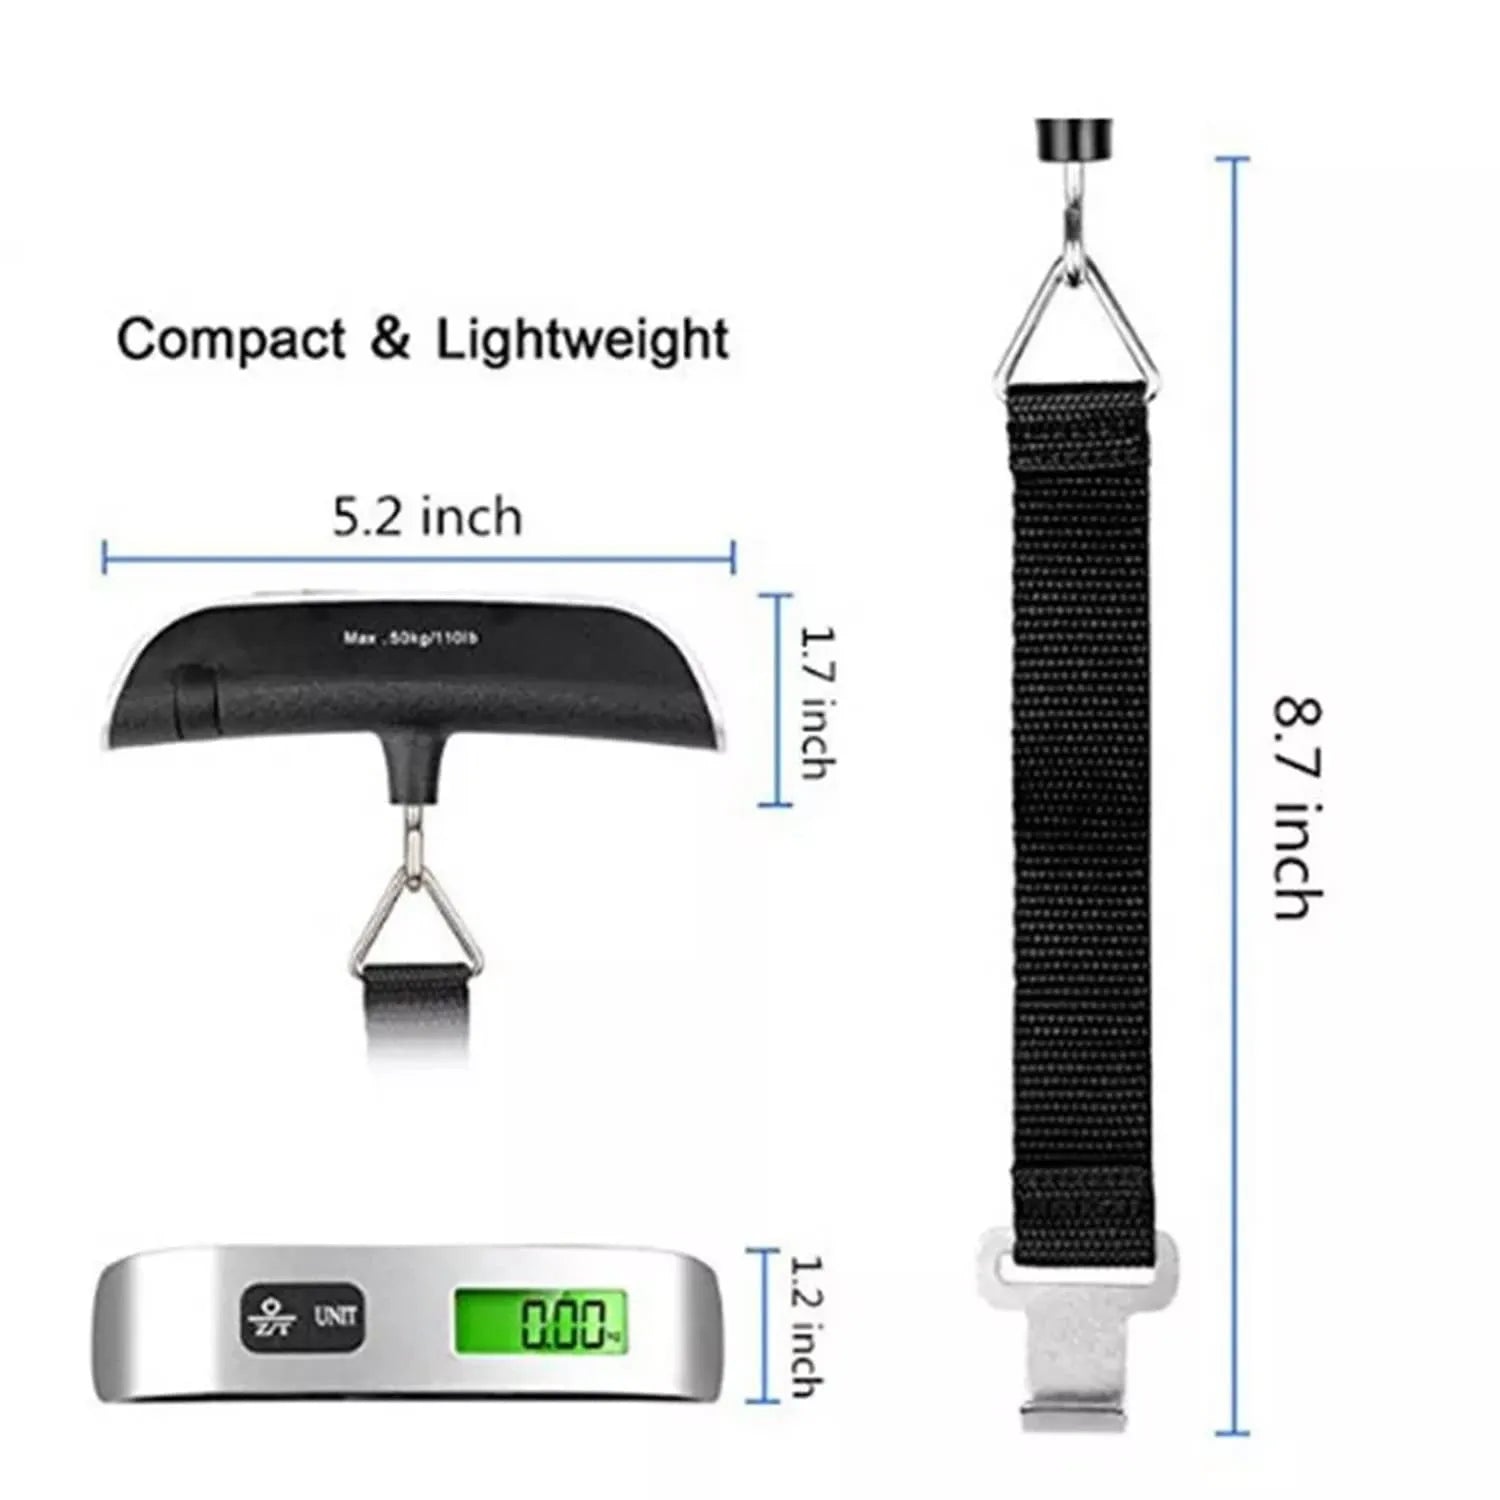 Portable Scale Digital LCD Display 110Lb/50Kg Electronic Luggage Hanging Suitcase Travel Weighs Baggage Bag Weight Balance